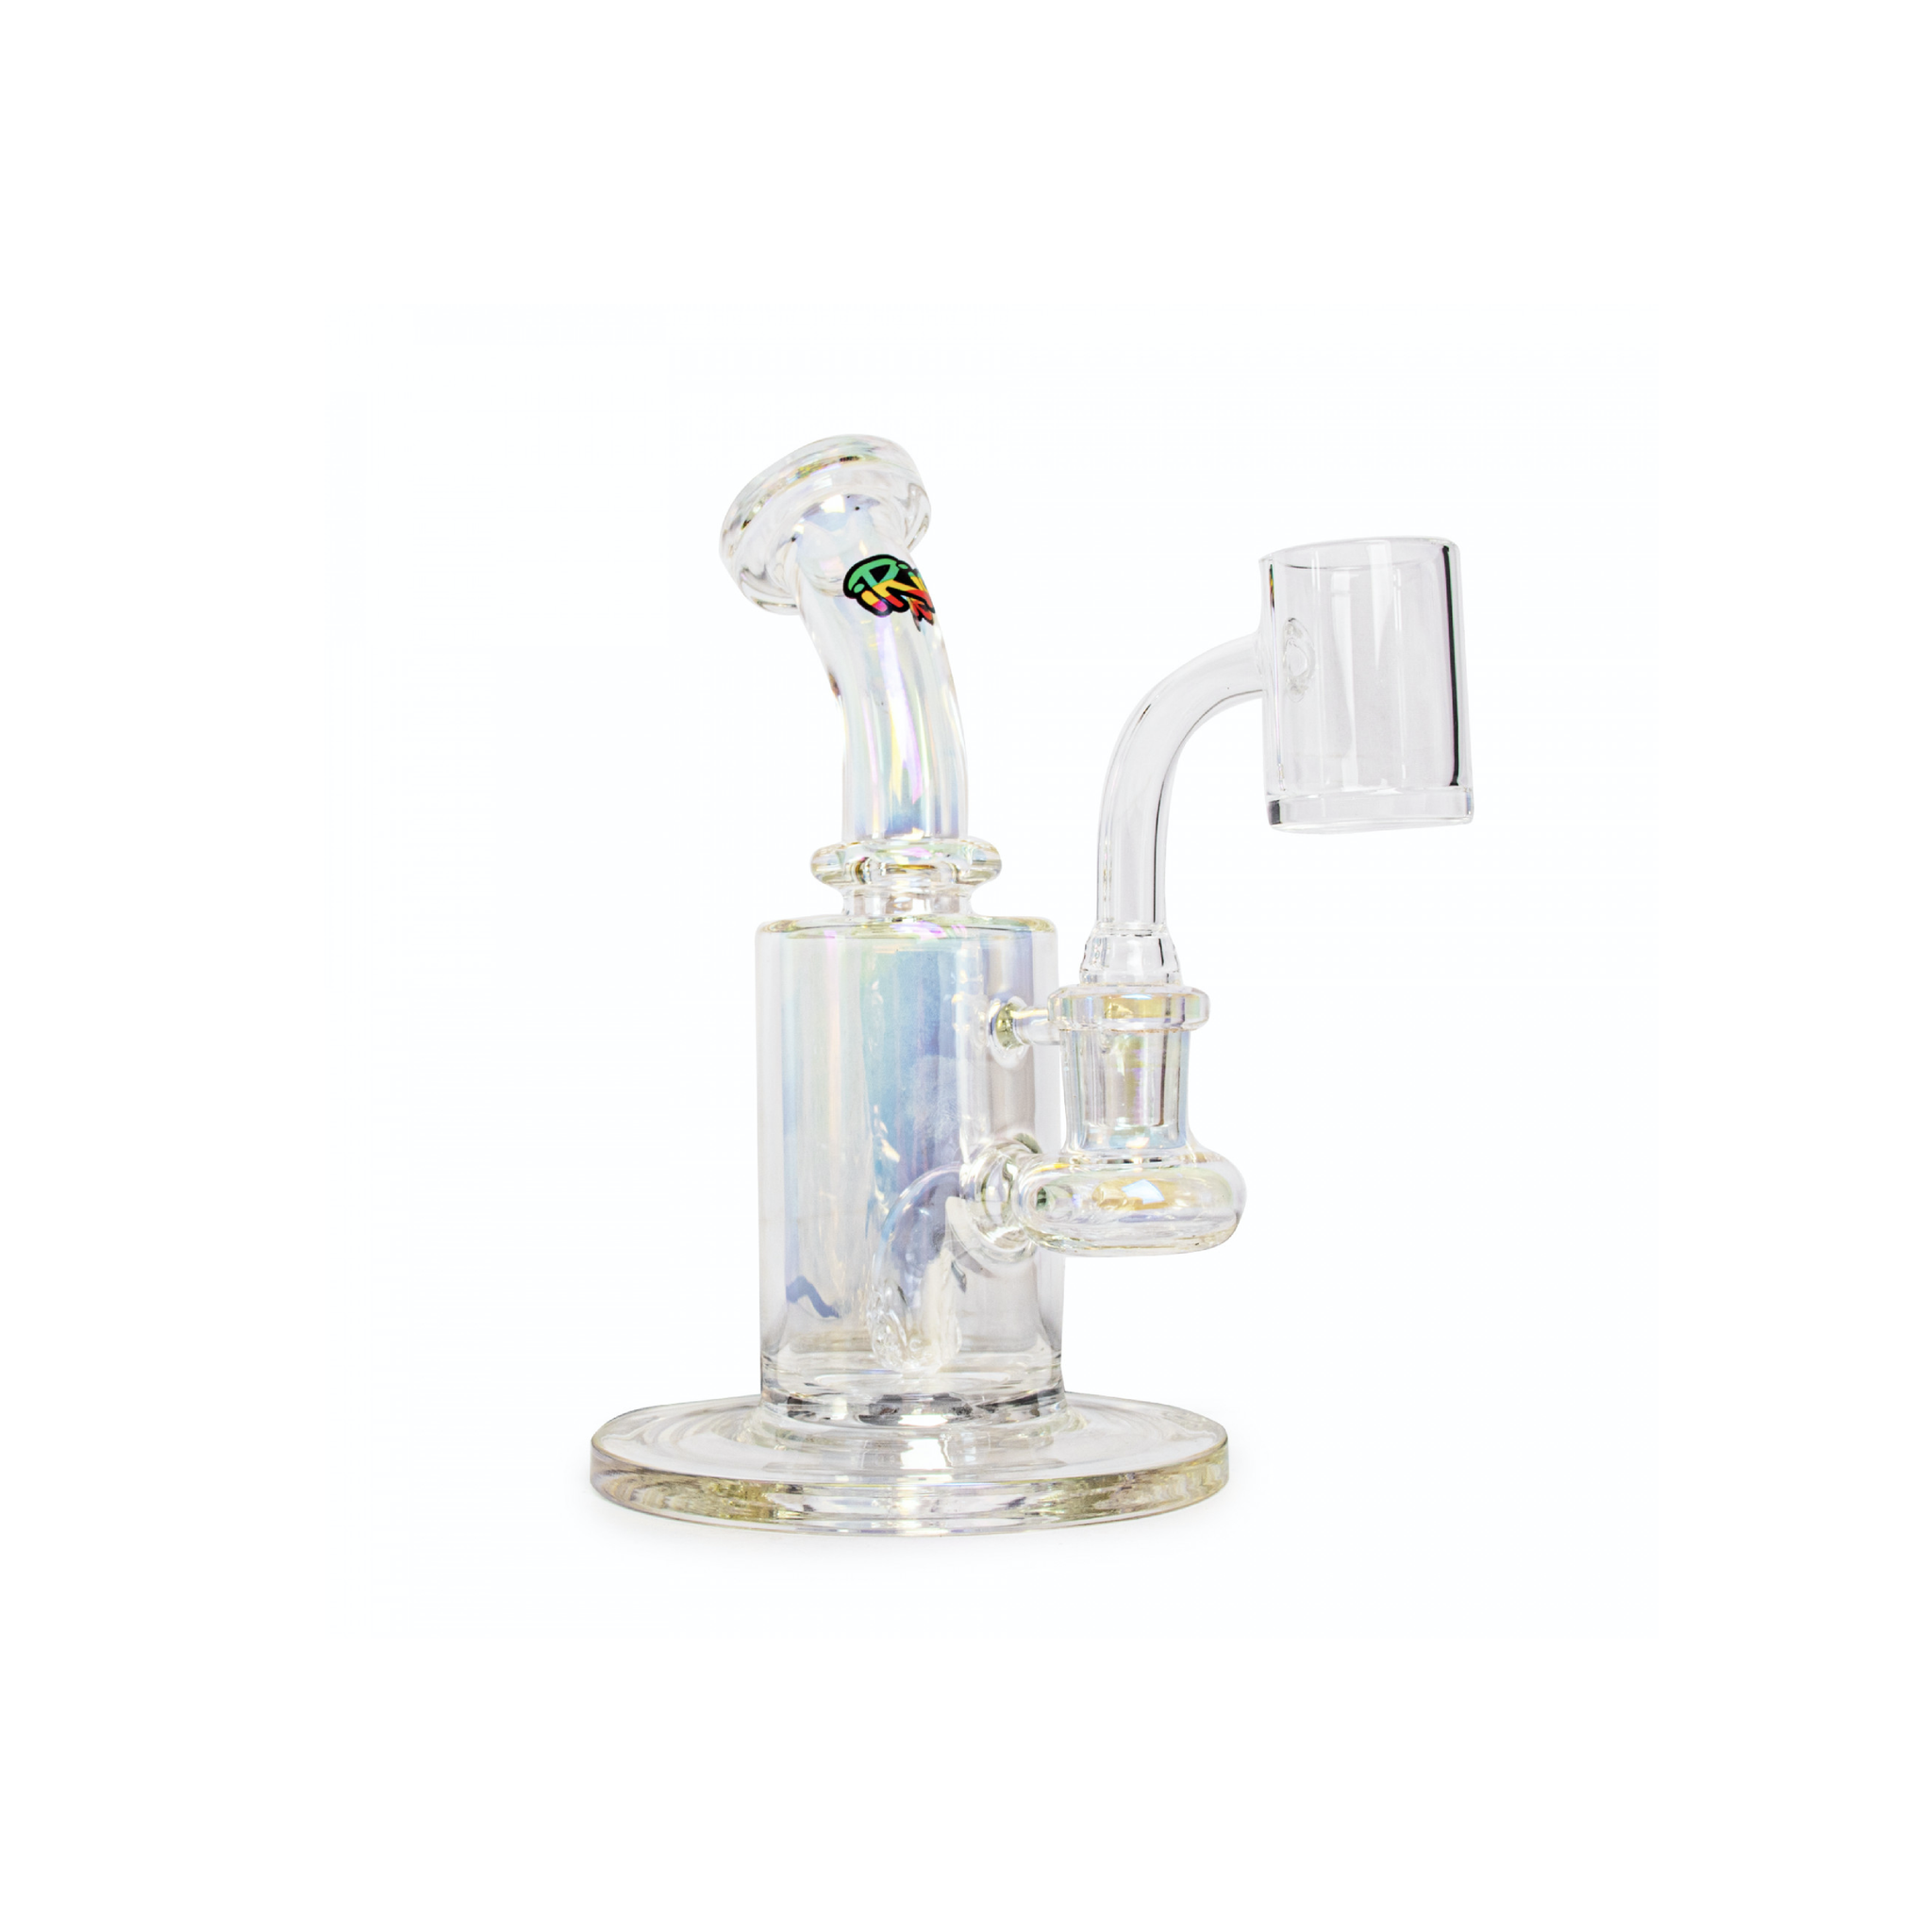 Metallic Finish Concentrate Rig